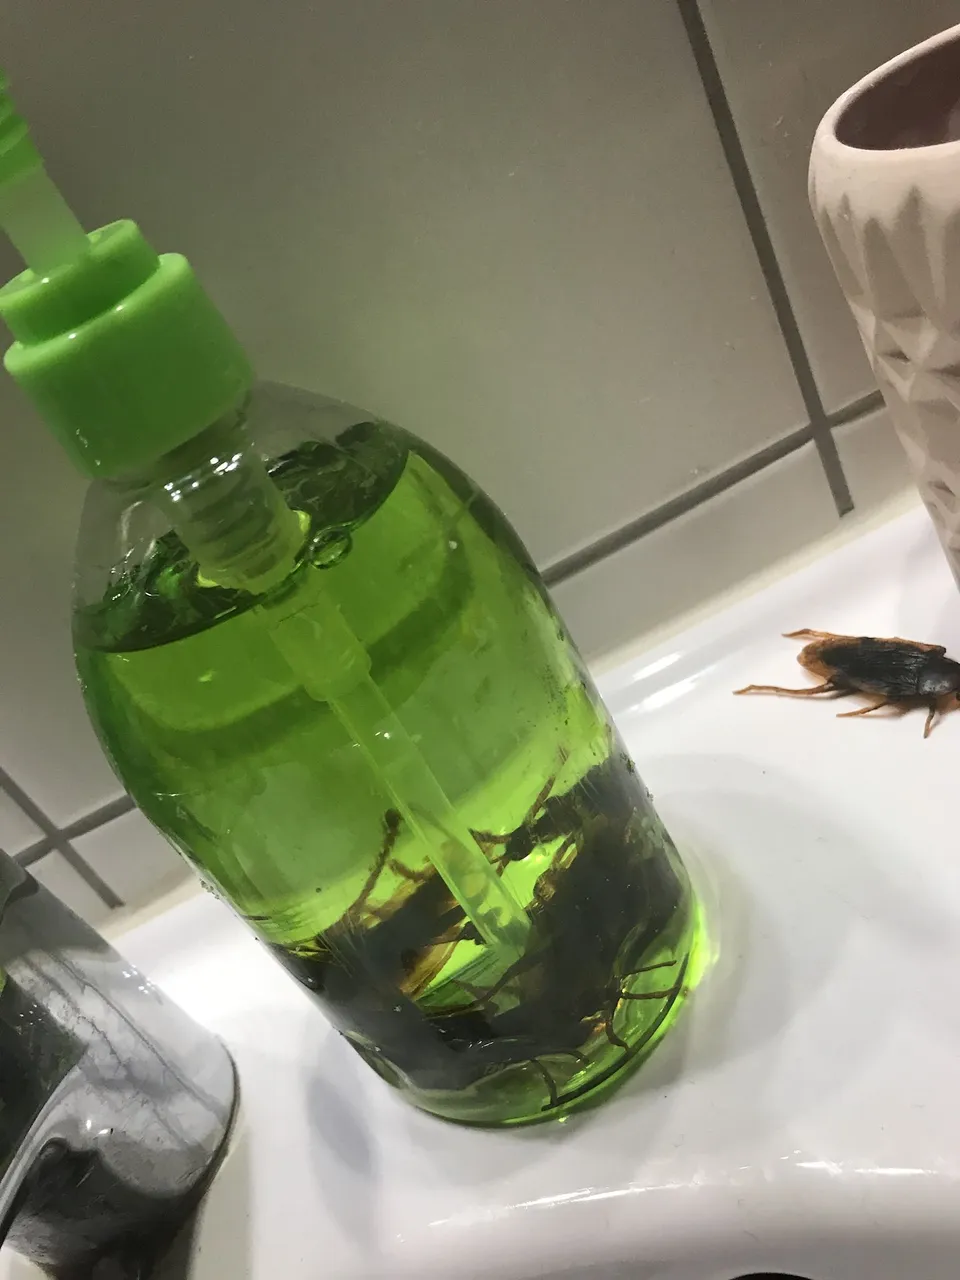 I was looking for some green soap, and I found it. I had some fake cockroach in the soap too. BUT, this soap was awful and it went in the trash right after the party. Never buying bad soap again.